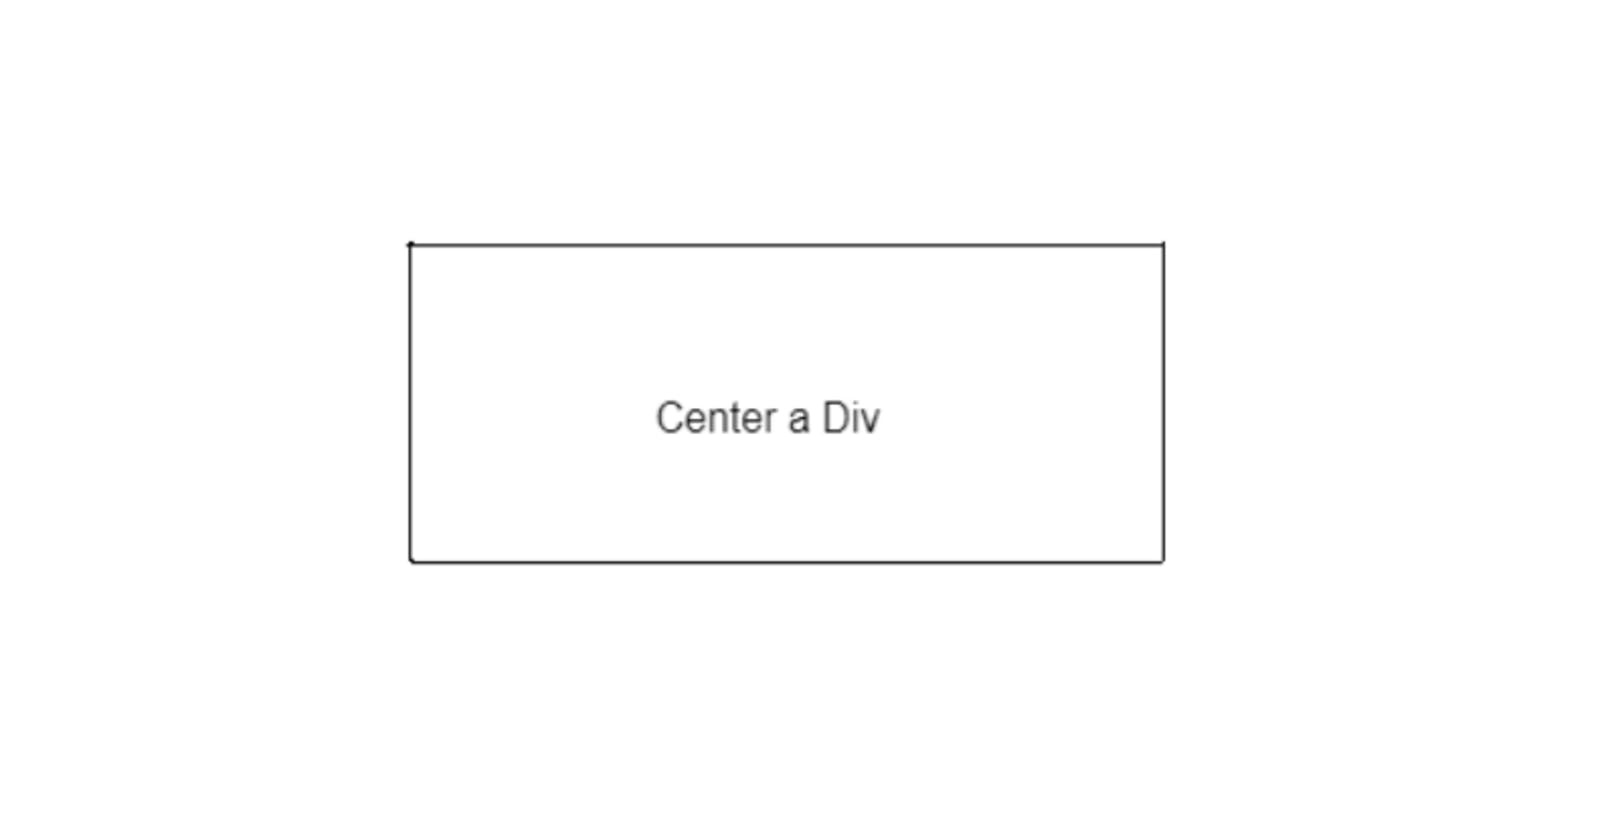 How to center a Div using HTML, CSS